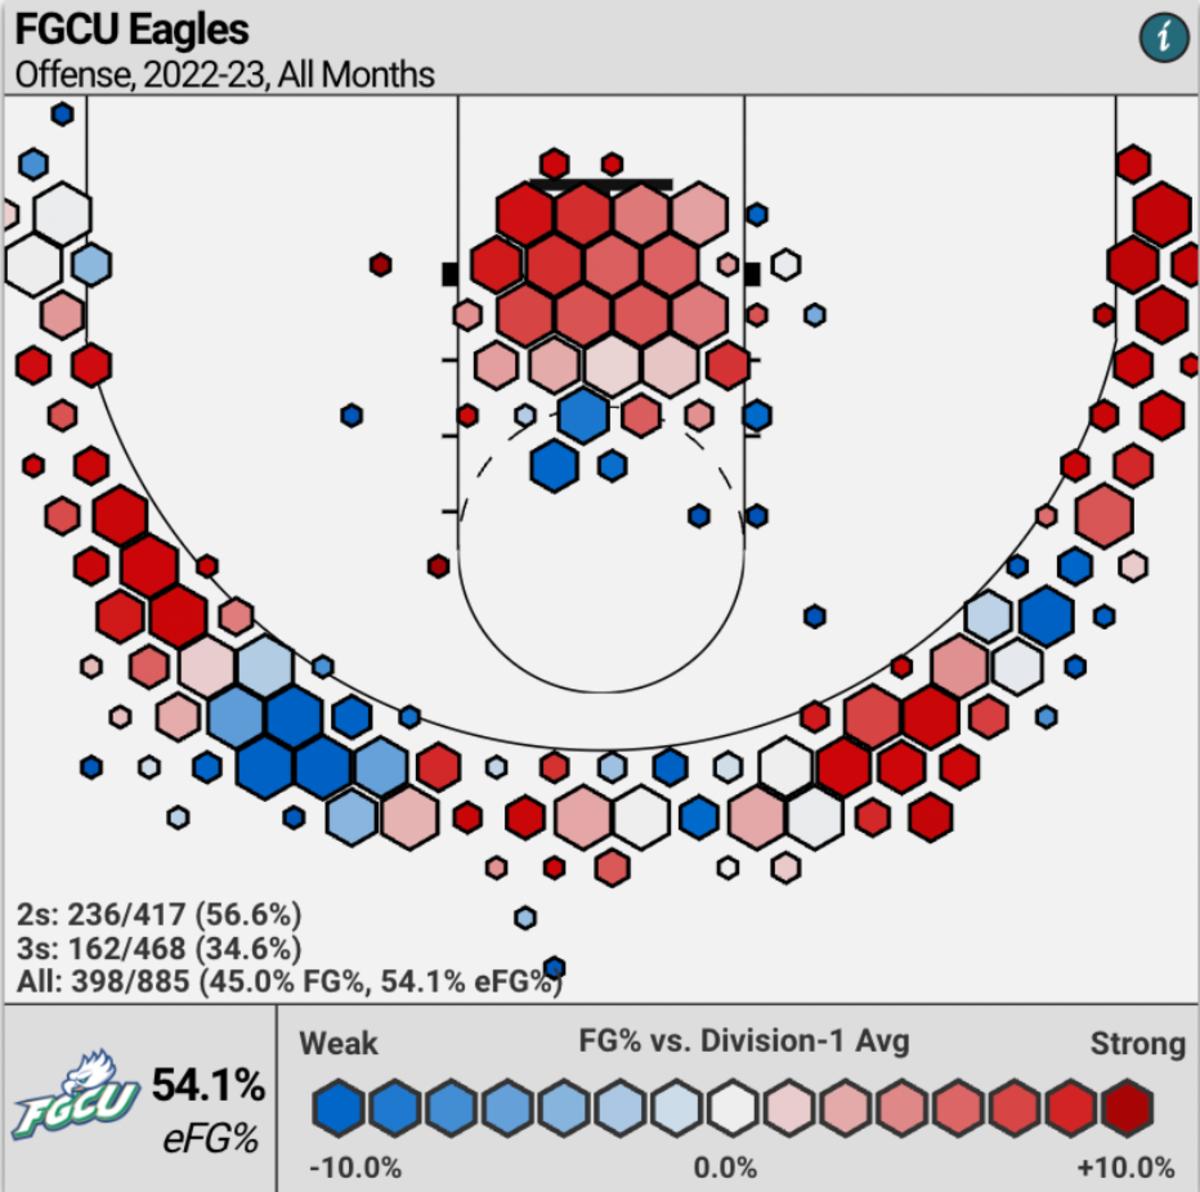 A shot chart of Florida Gulf Coast University’s women’s basketball team’s offense this season, which shows the majority of shots taken in the paint or beyond the three-point line.